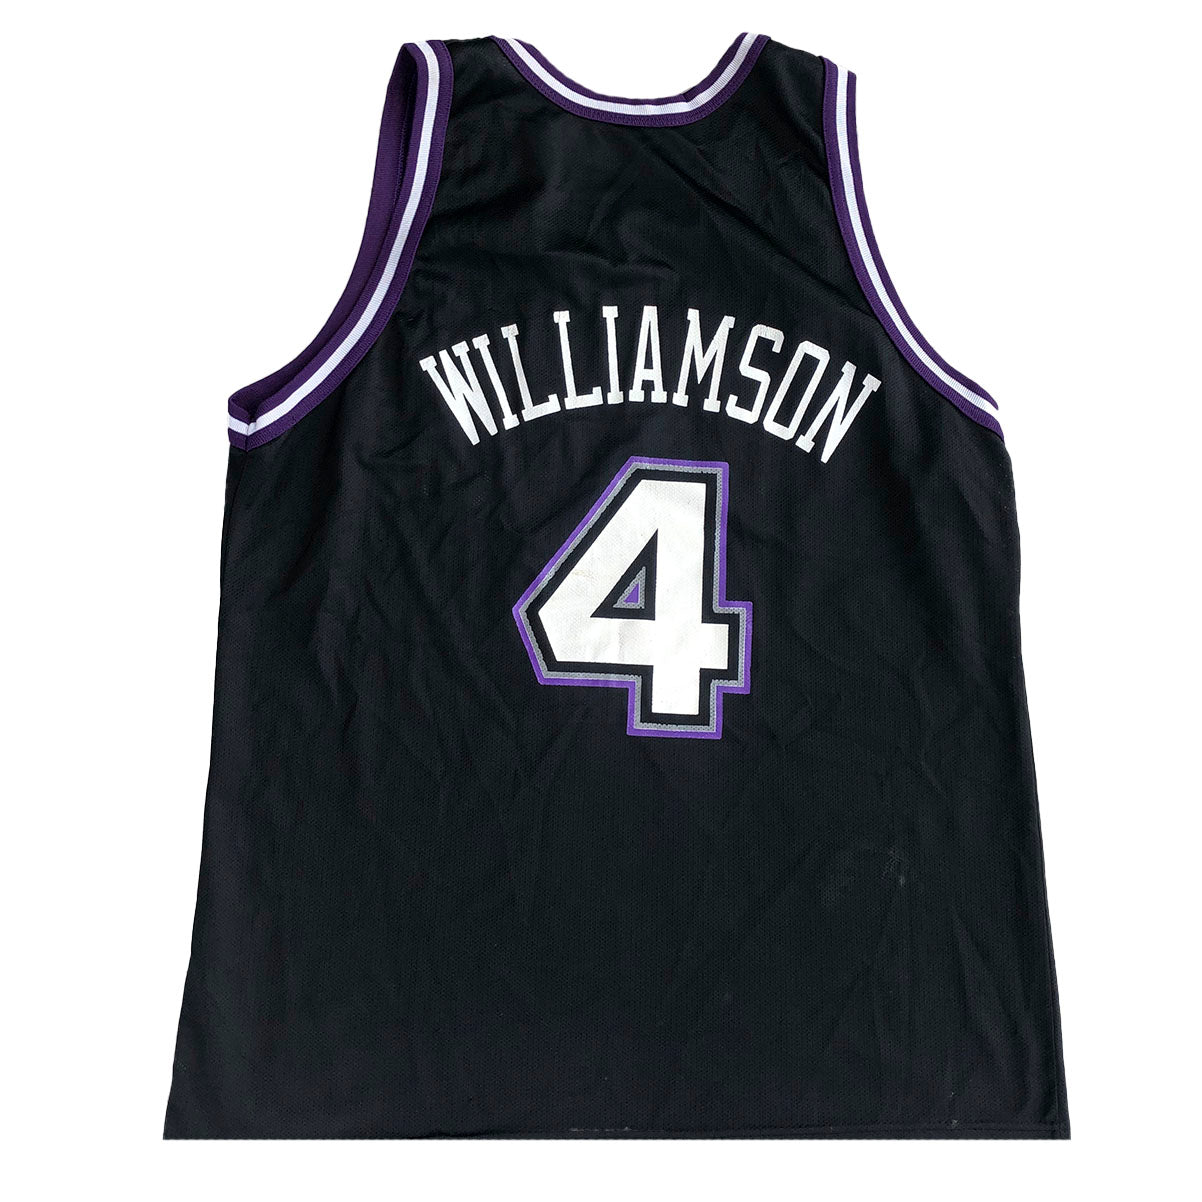 SACRAMENTO KINGS Corliss Williamson #34 Jersey “TheBigNasty” PURPLE Adult  MEN size small /youth XL RARE Vintage “LightTheBeam” “Playoffs” for Sale in  Sacramento, CA - OfferUp